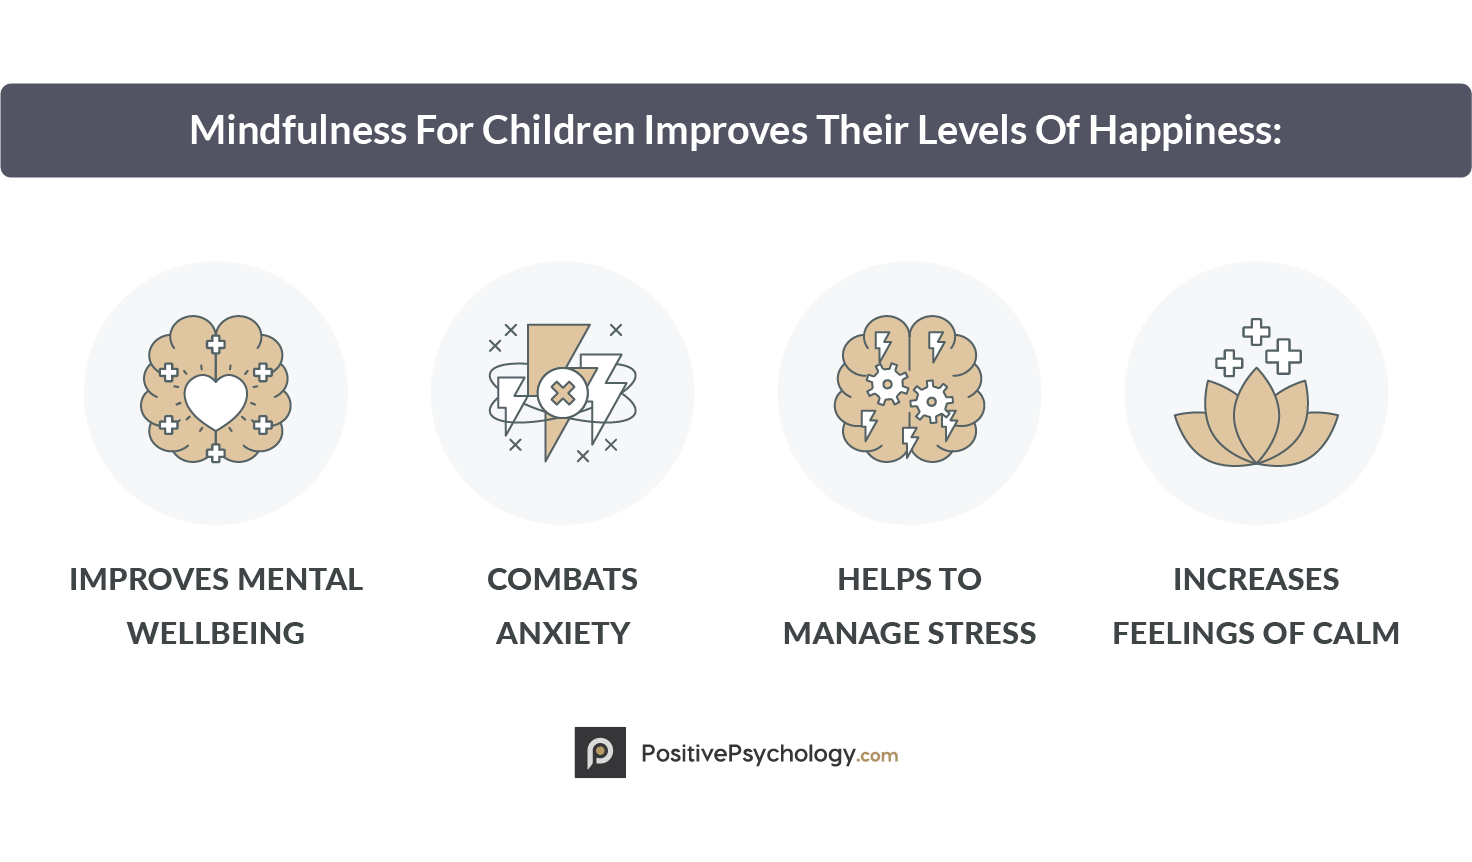 Mindfulness For Children Improves Their Levels Of Happiness